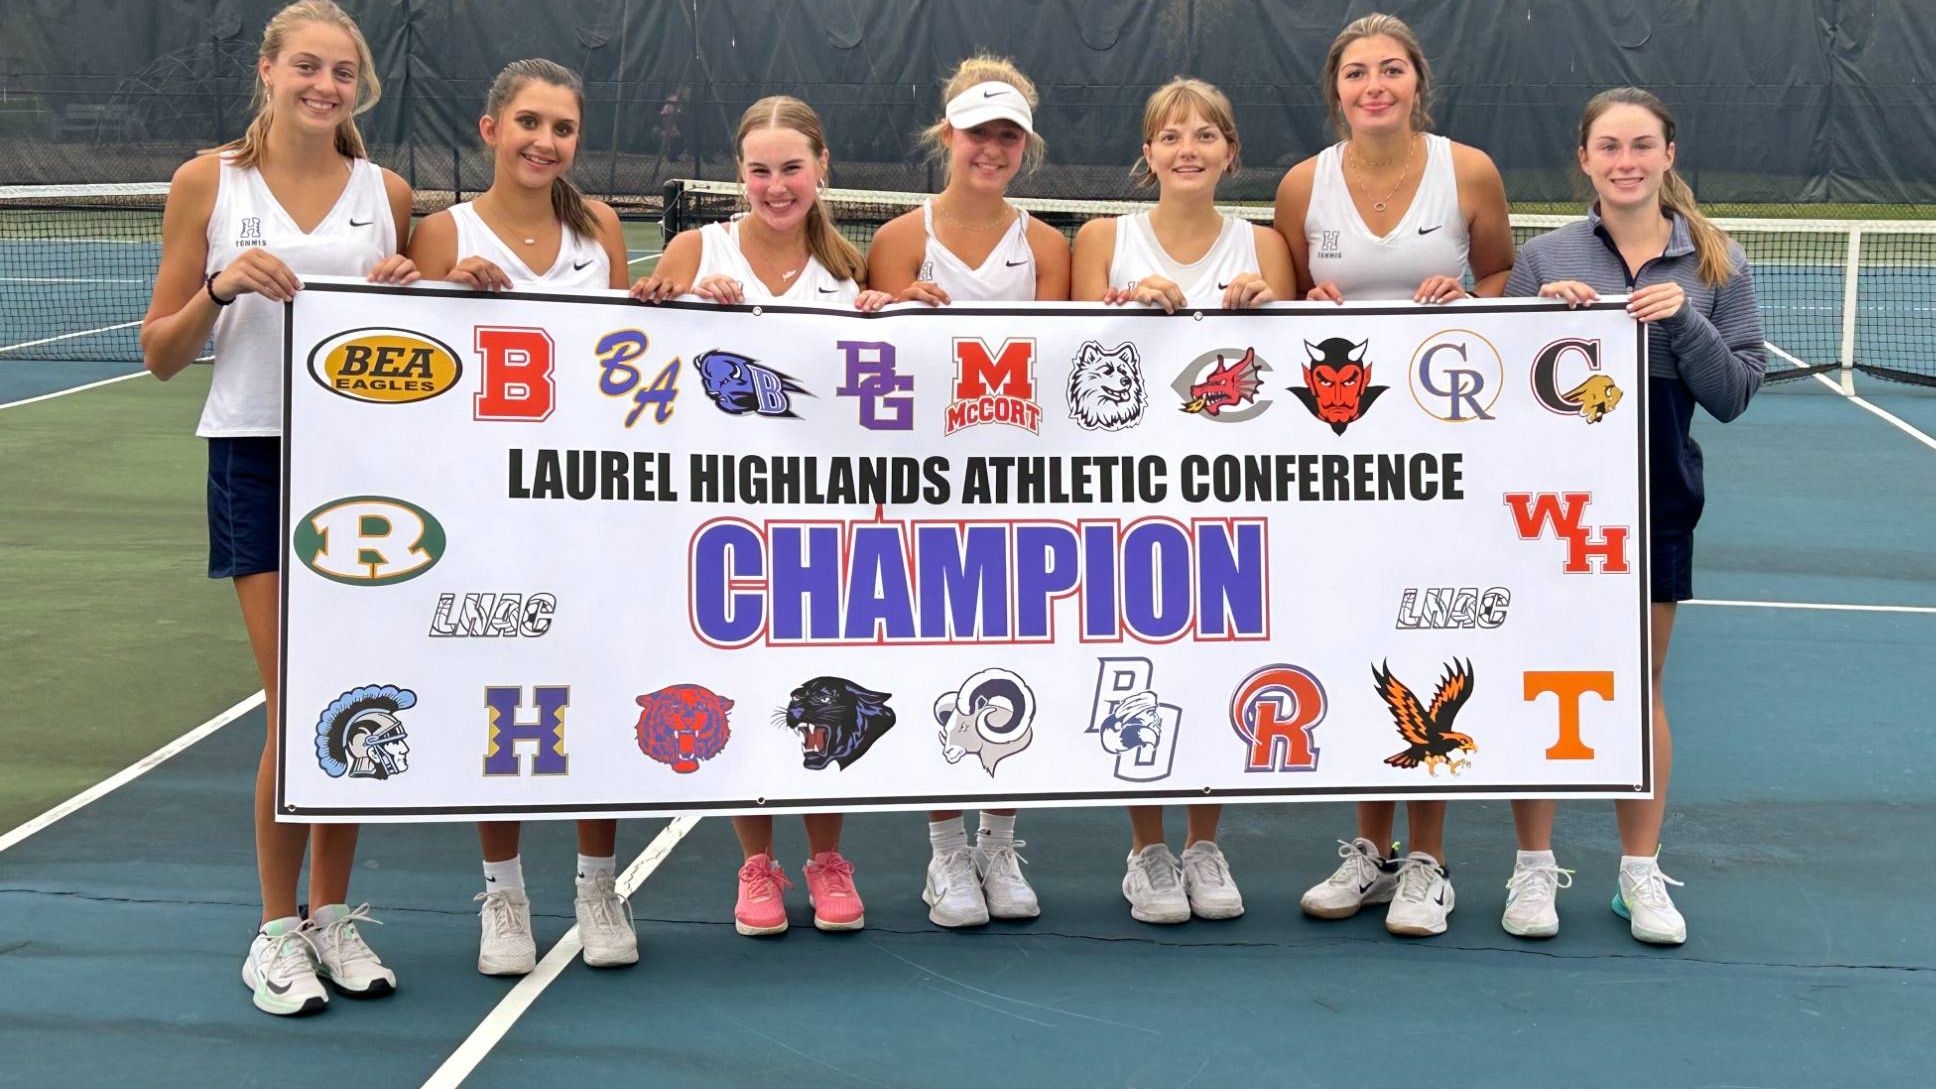 LHAC GIRLS TEAM TENNIS CHAMPIONS - Content Image for hollidaysburgareashs_bigteams_26317